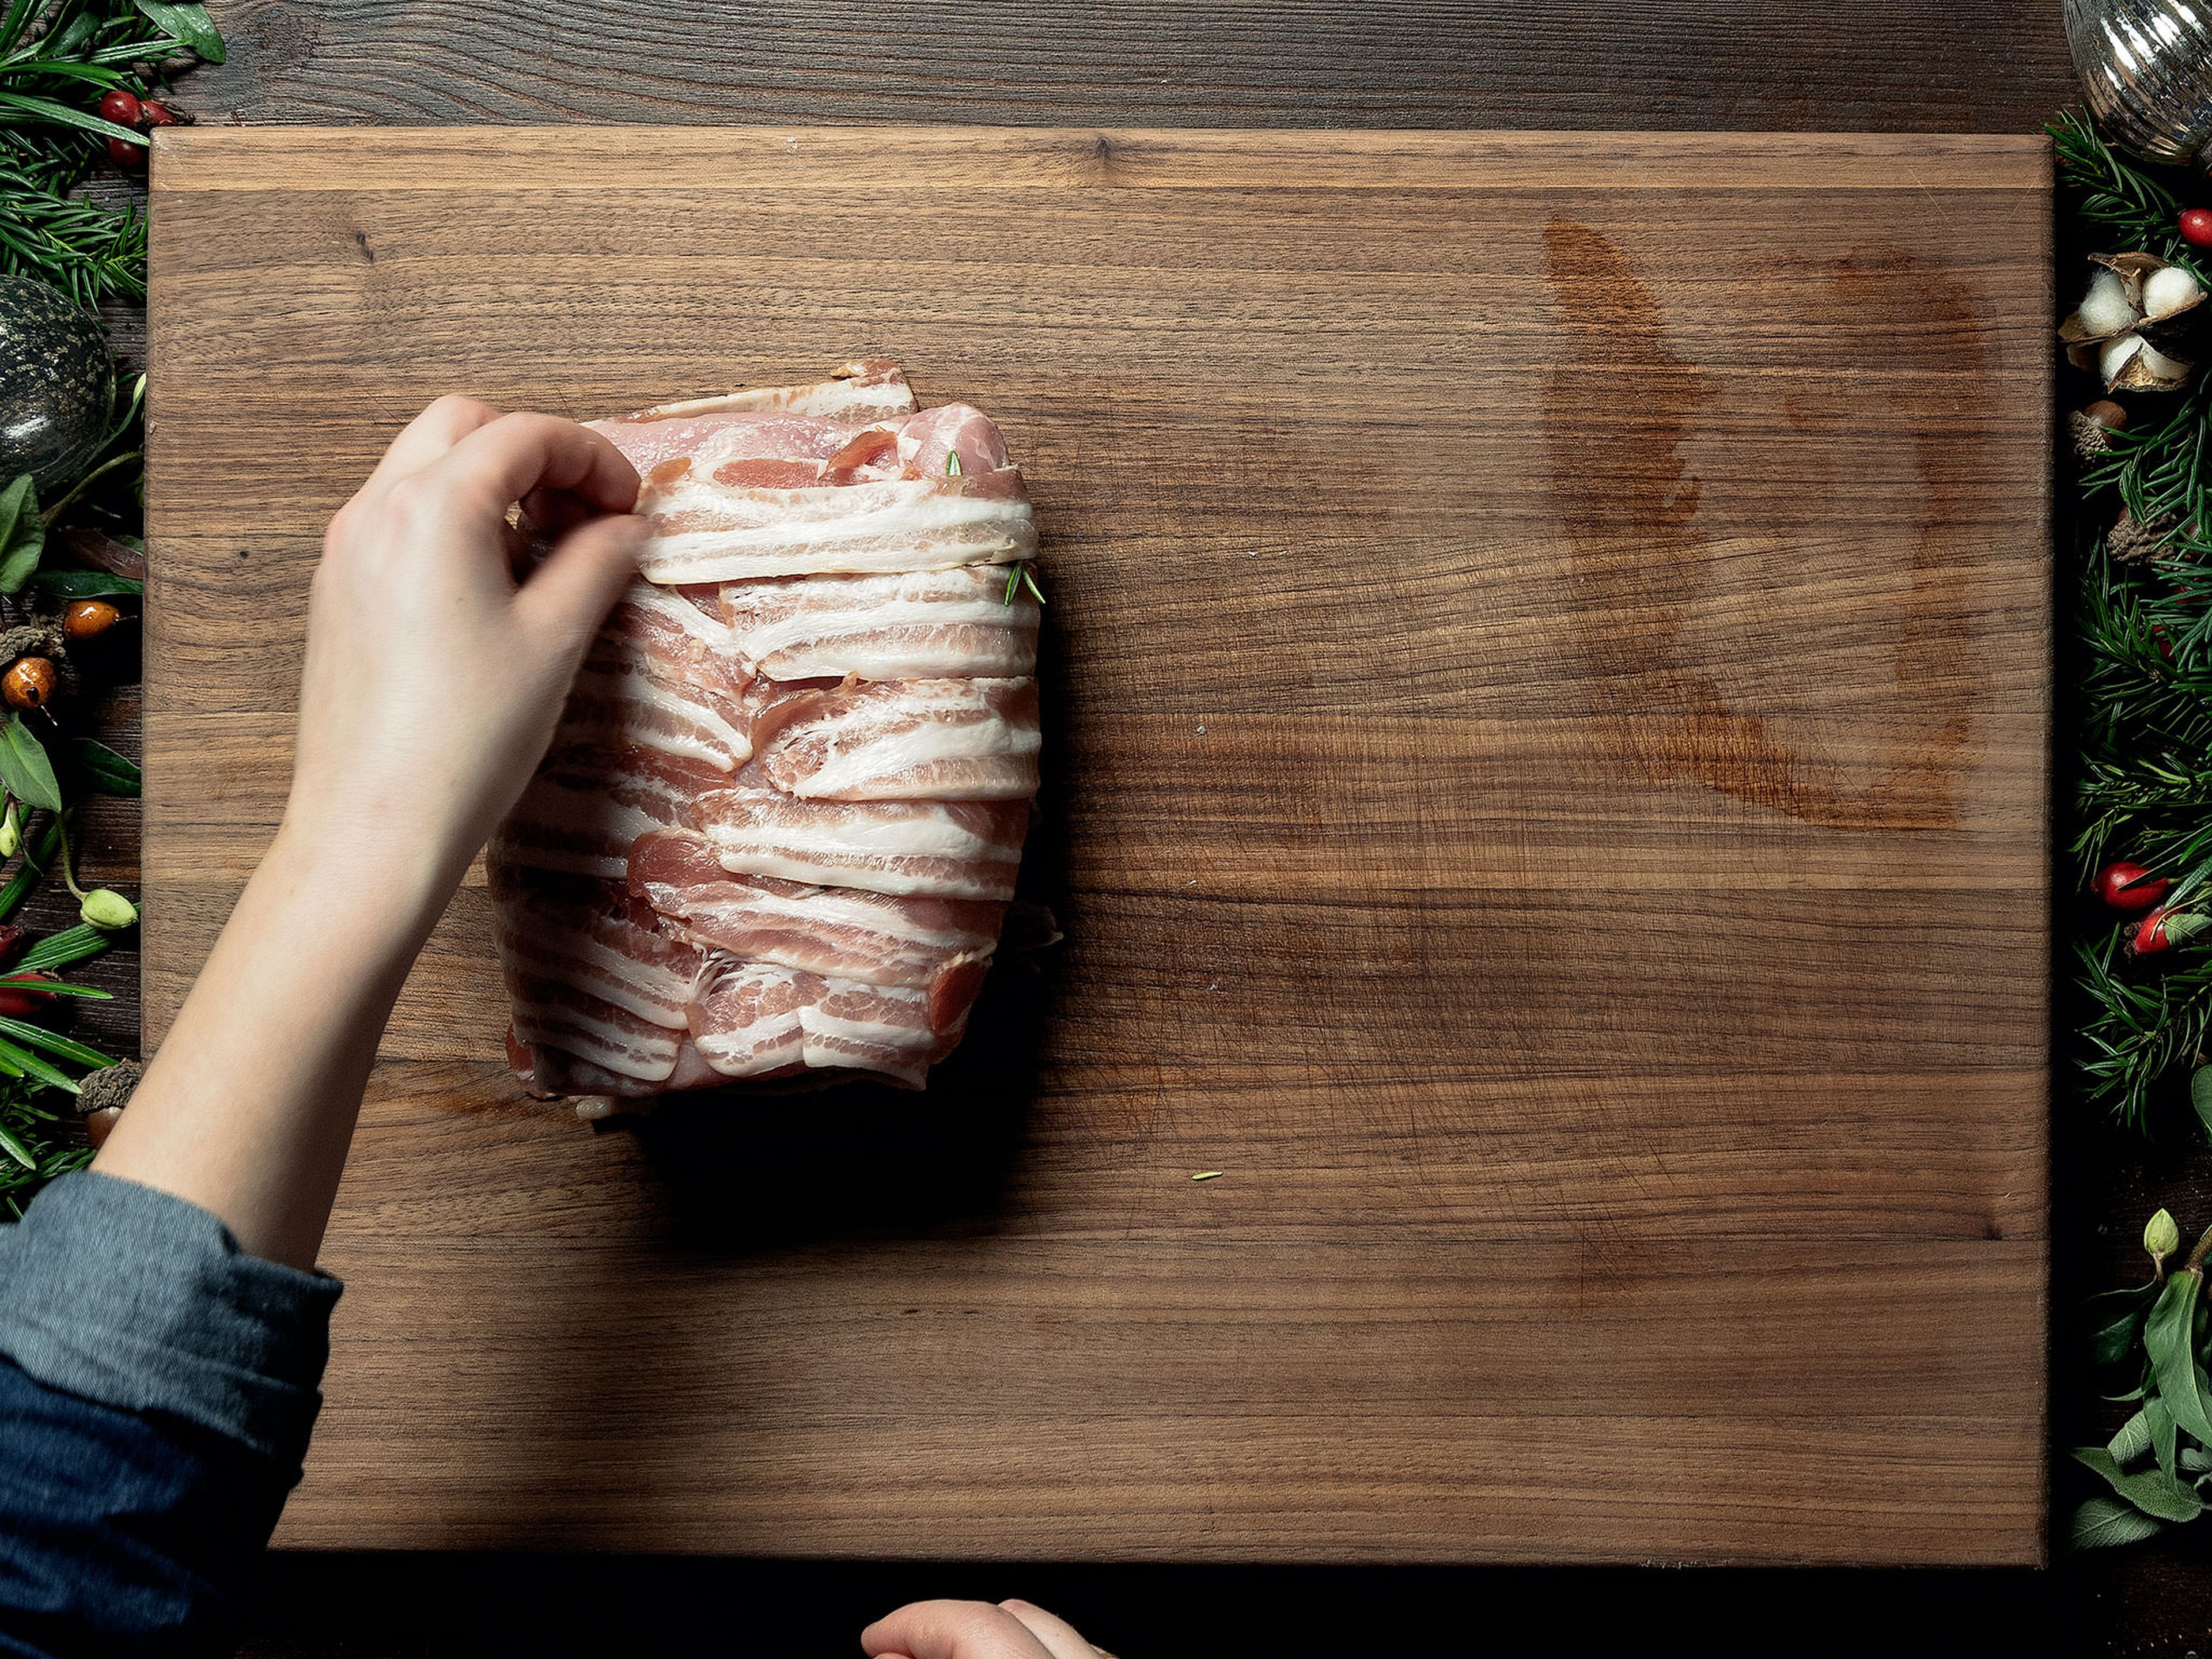 Layer the bacon slices on a work surface. Add rosemary leaves in the middle and add the pork loin, cut side-down. Wrap the bacon around the pork and press together. Tie with kitchen twine.